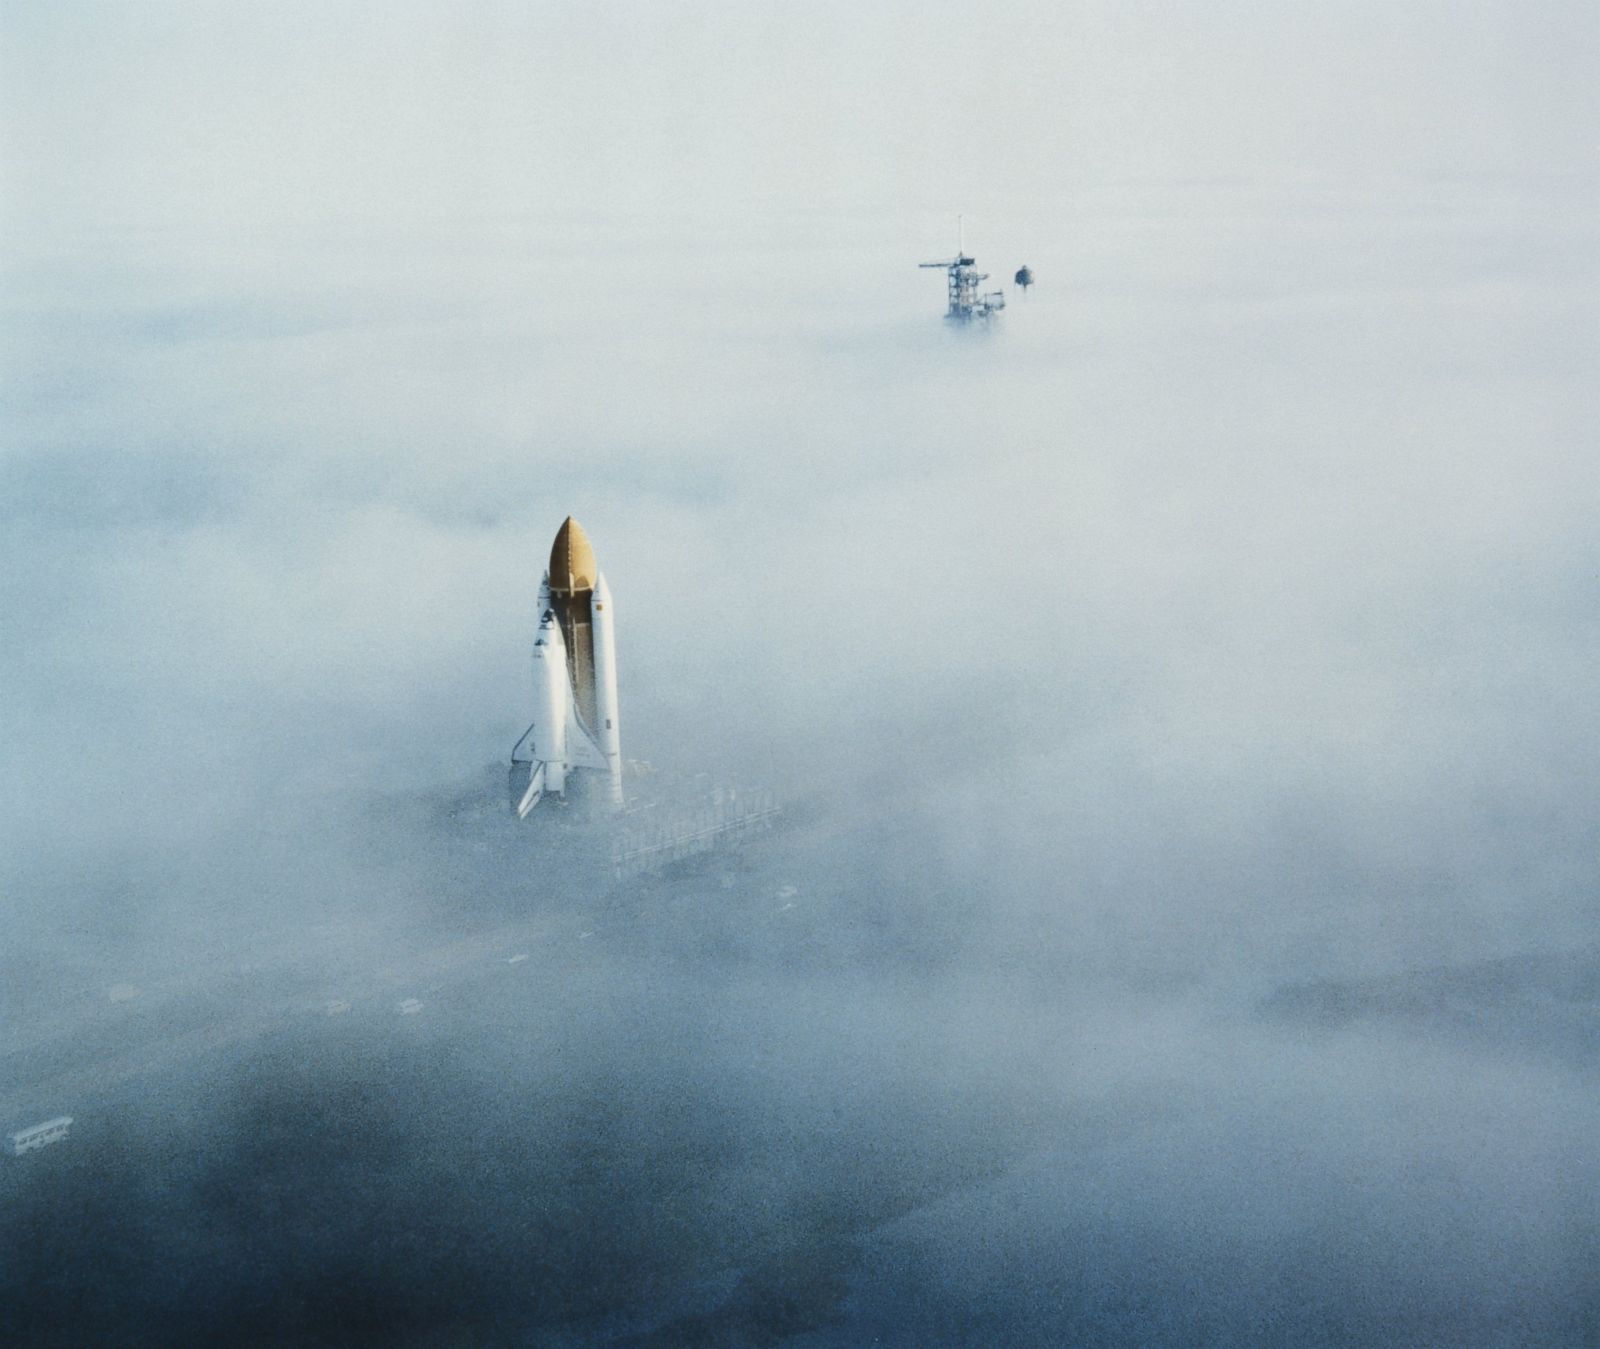 Picture | 30 Years Since the Space Shuttle Challenger Disaster - ABC News1600 x 1349